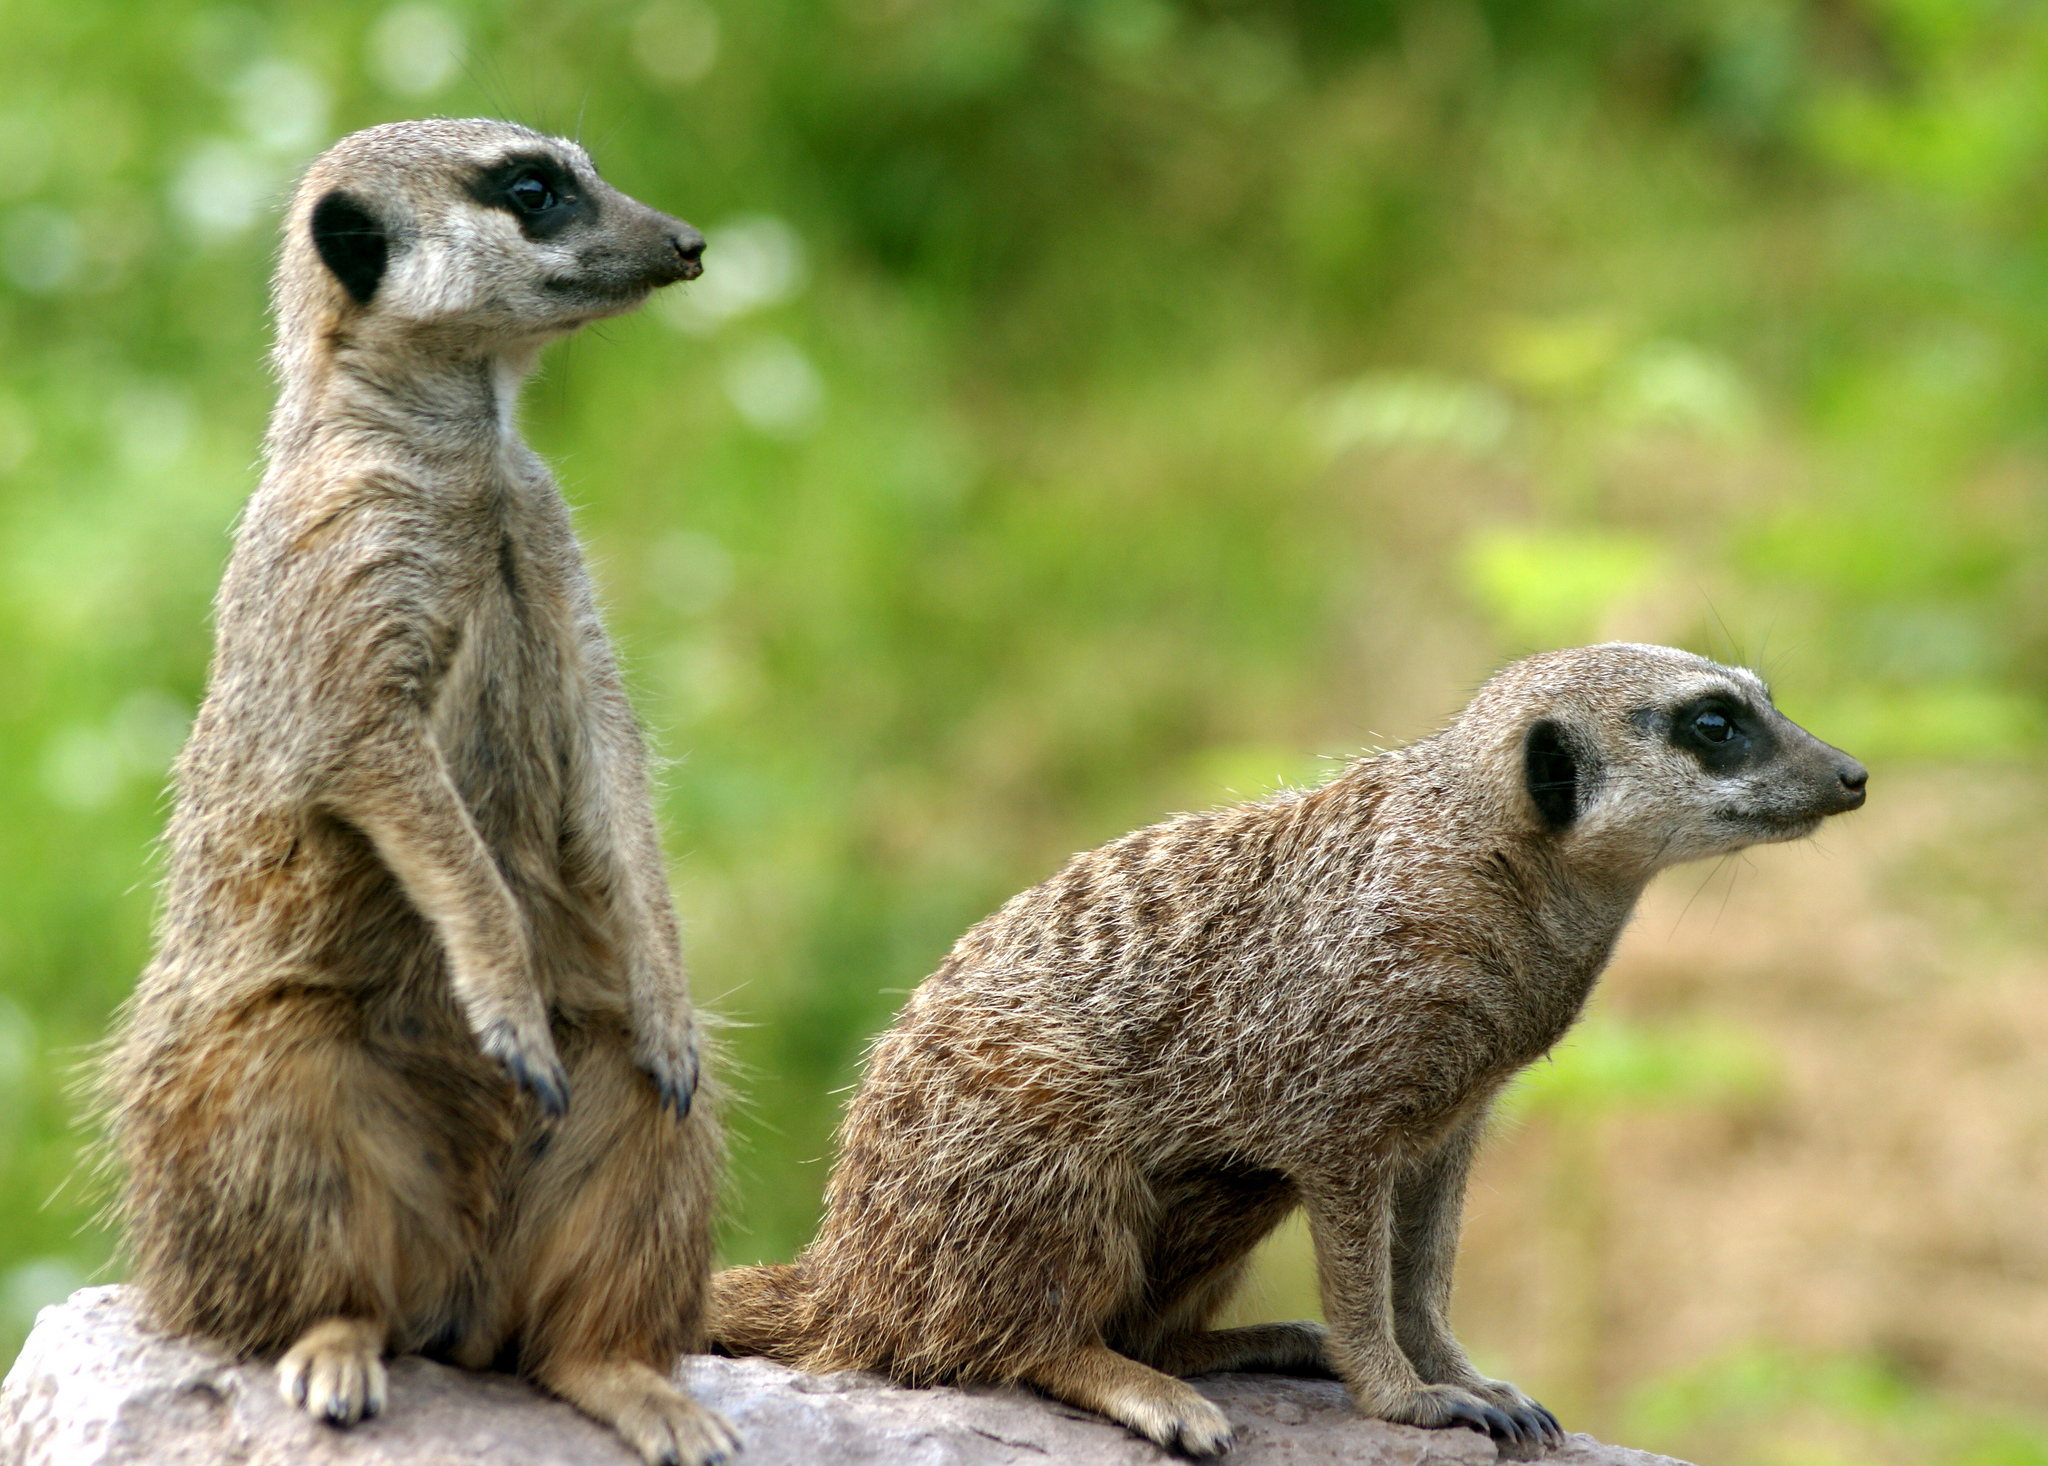 Meerkats in a Moscow Park